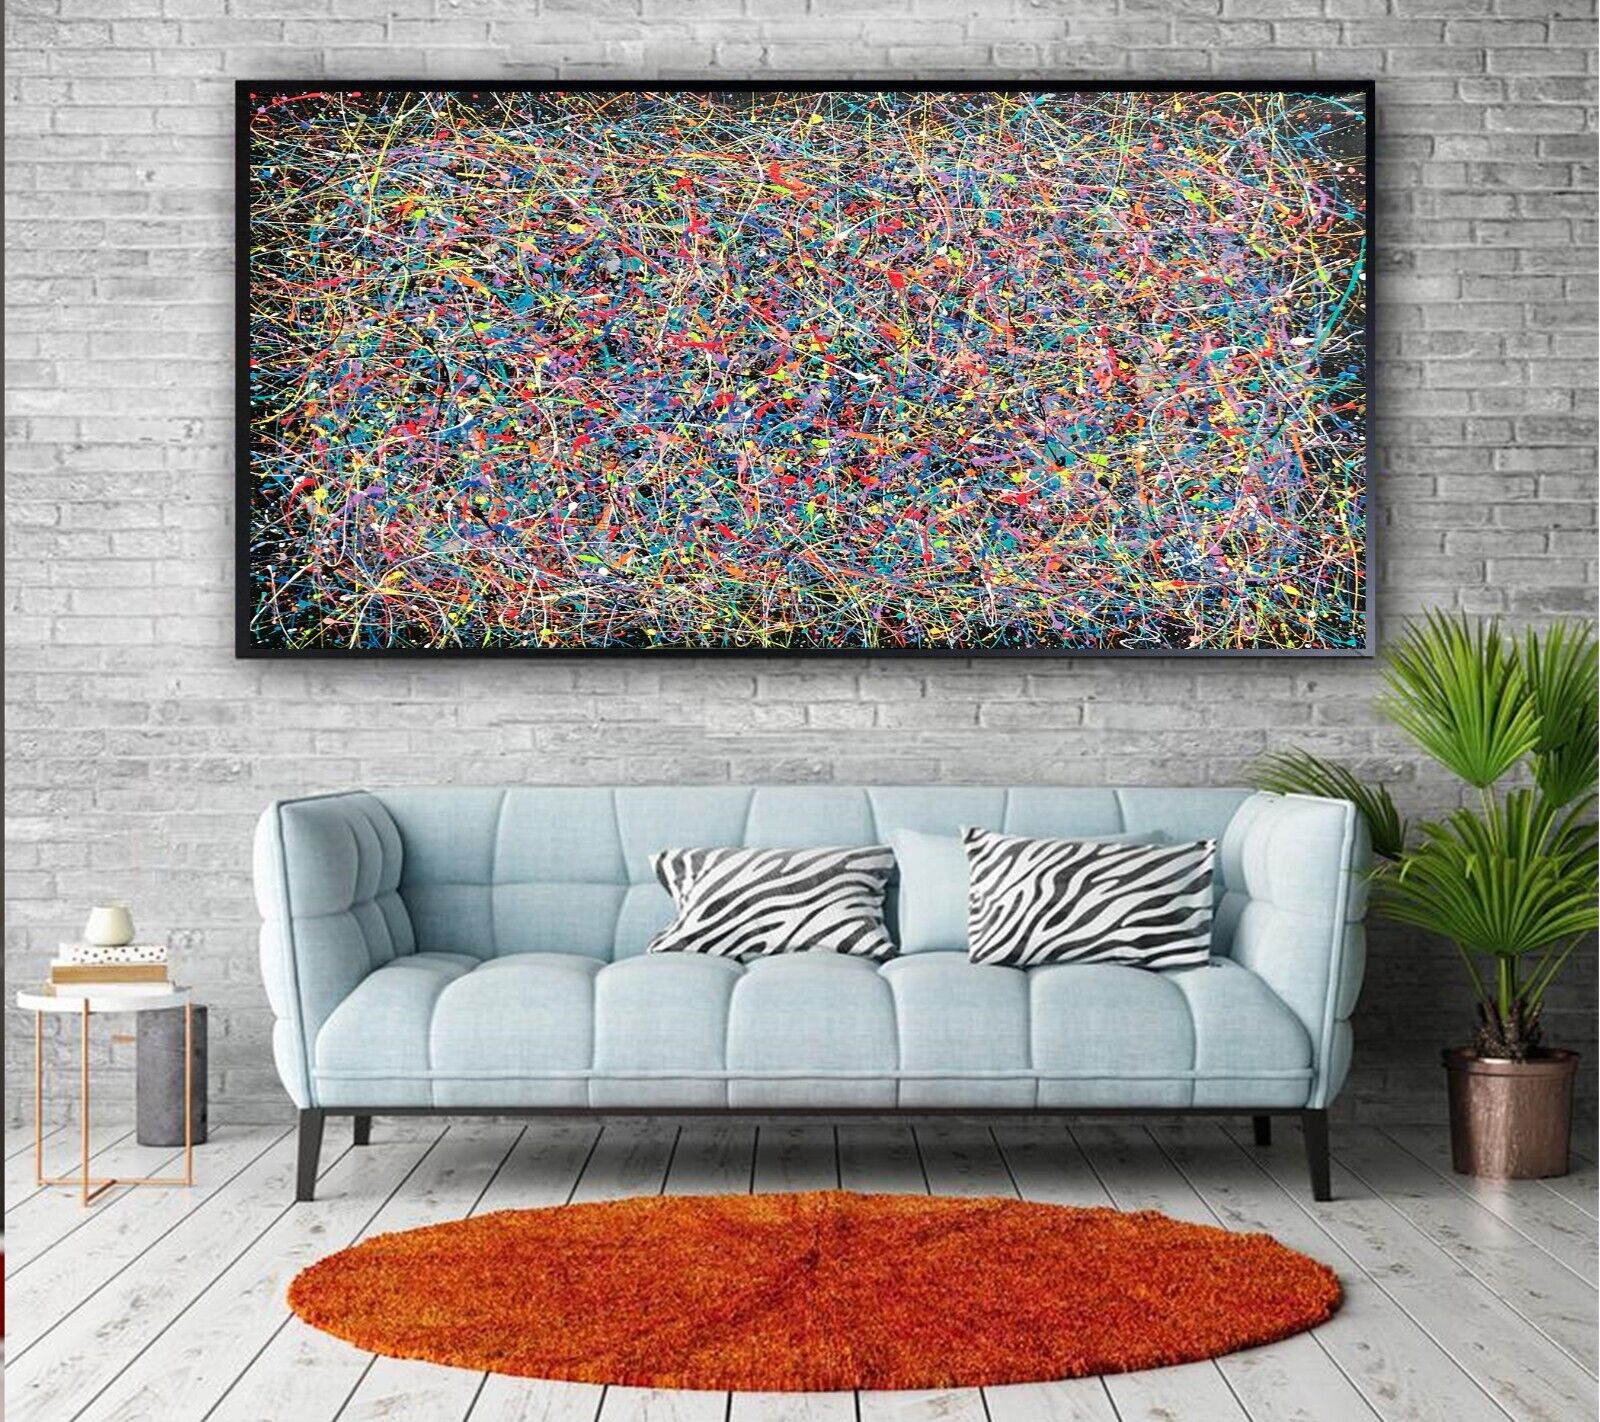 Sale Abstract Tropics 36H X 24W Framed Canvas Giclee Winford $595 Now $295